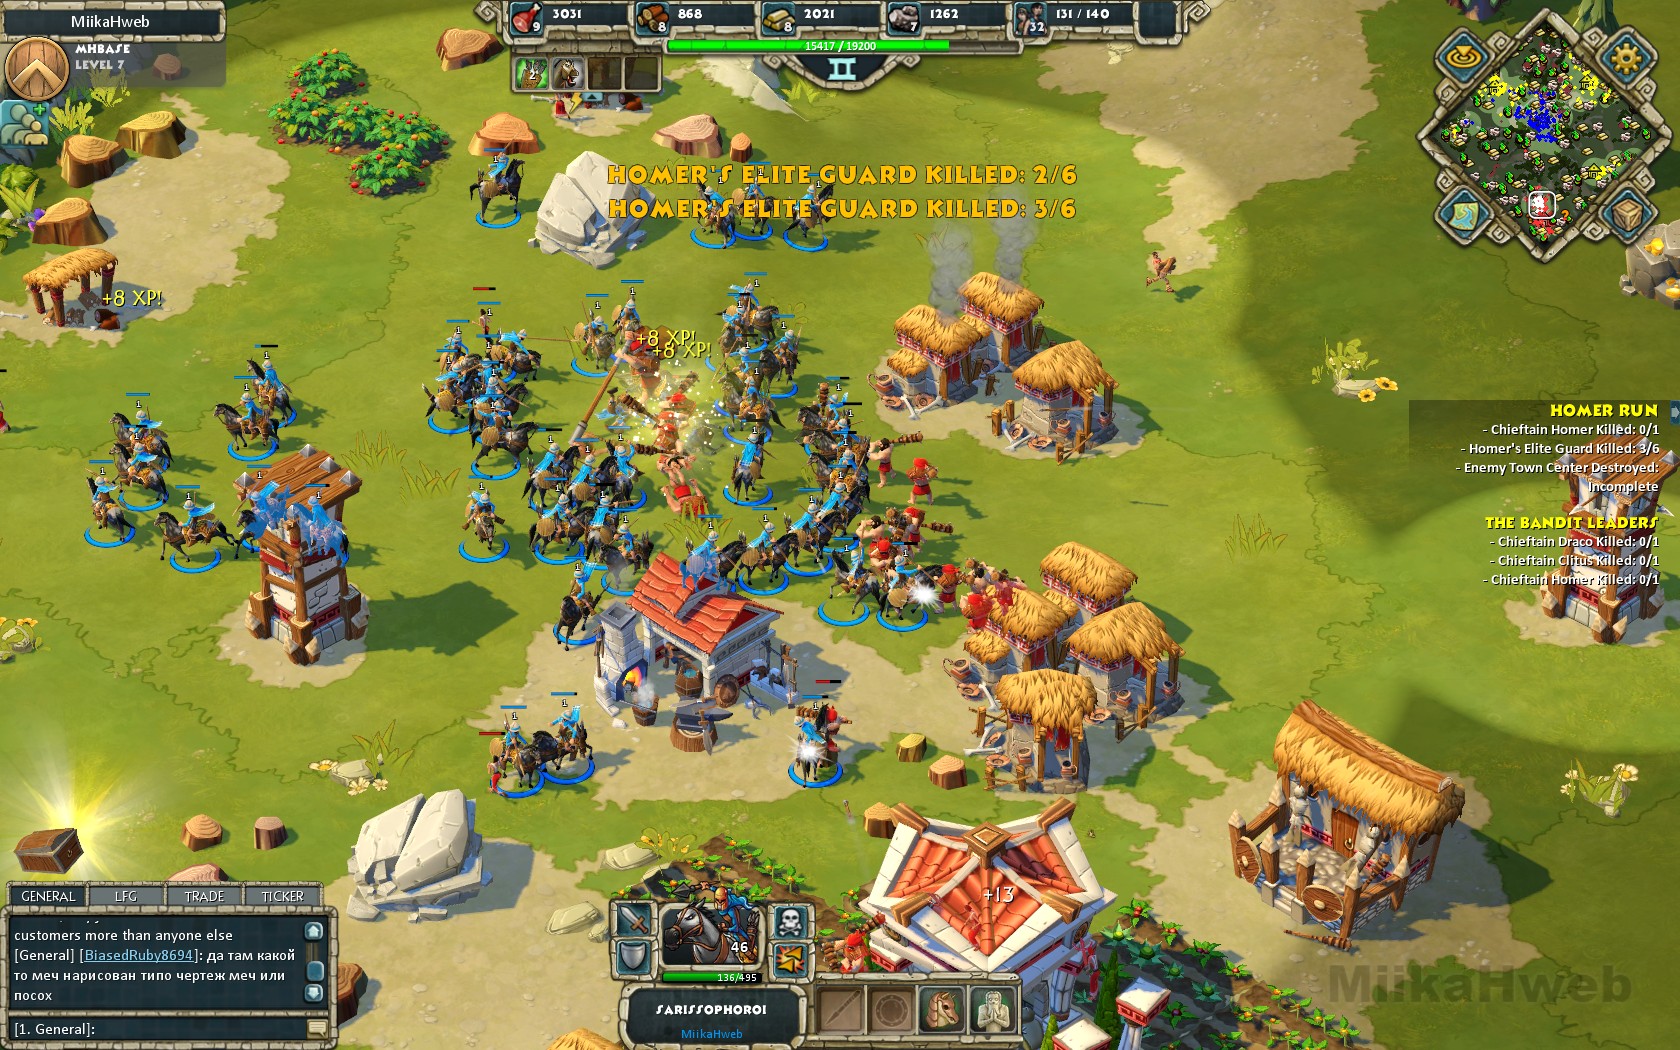 age of empire 2 online play free